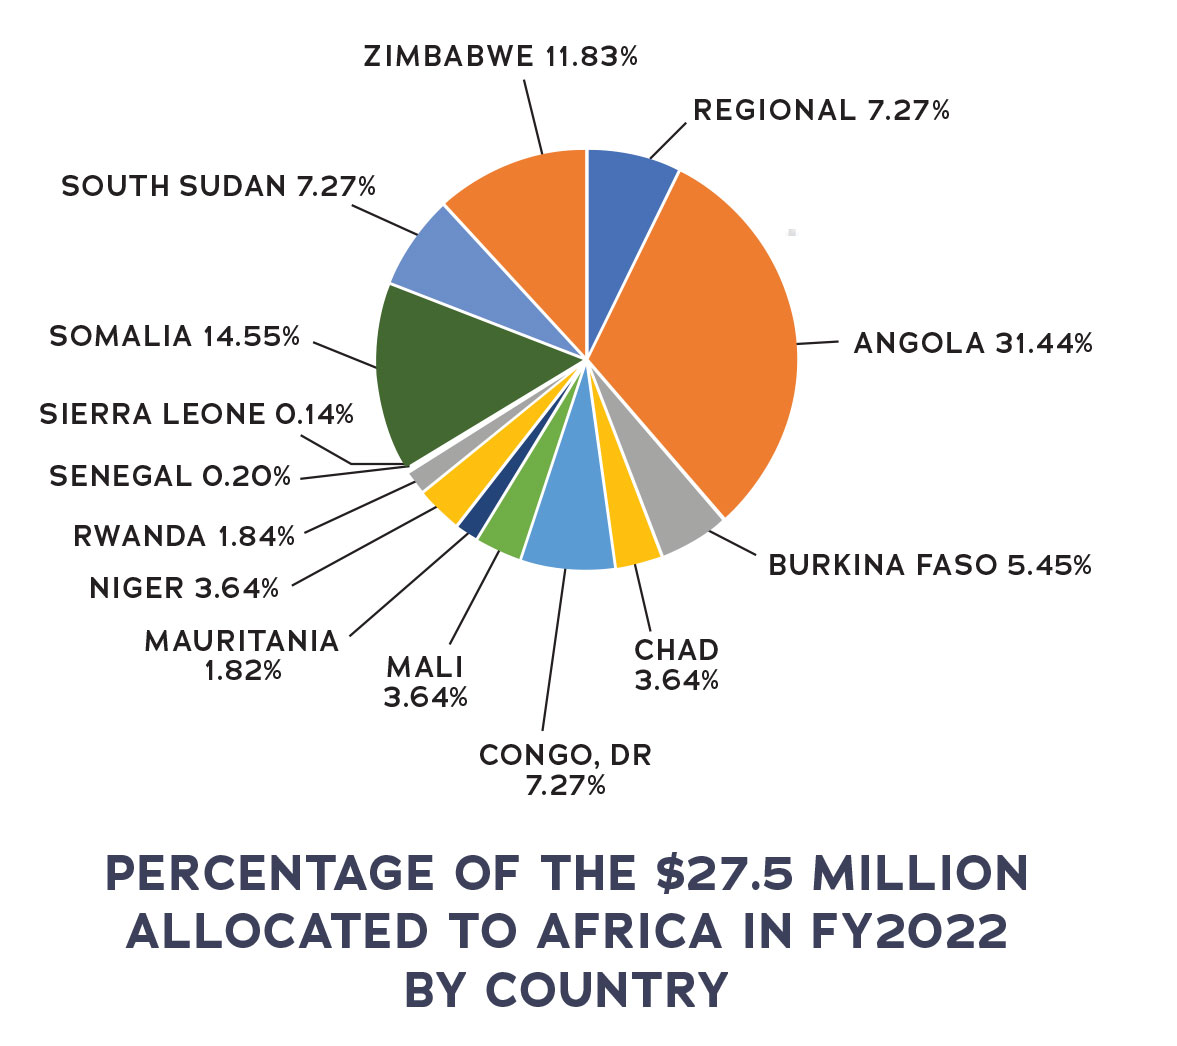 Percentage of the $27.5 Million Allocated to Africa in FY2022 by Country, full text description in Appendix A